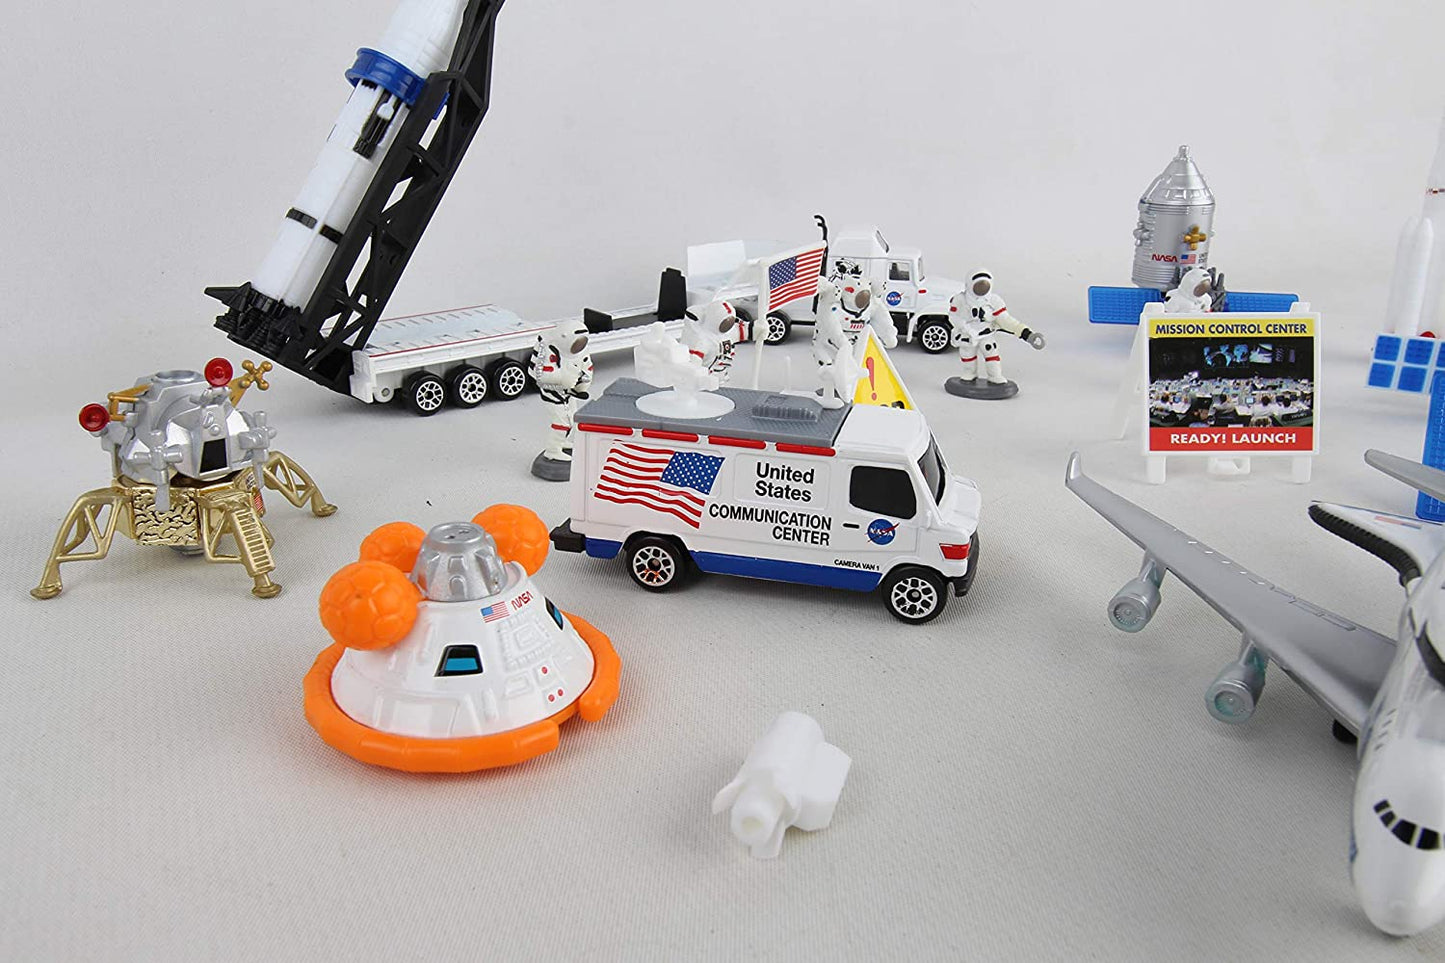 Space Mission 20 Piece Play Set Included Shuttle, Astronauts, Lunar Landers, Satellites, Space Travelers